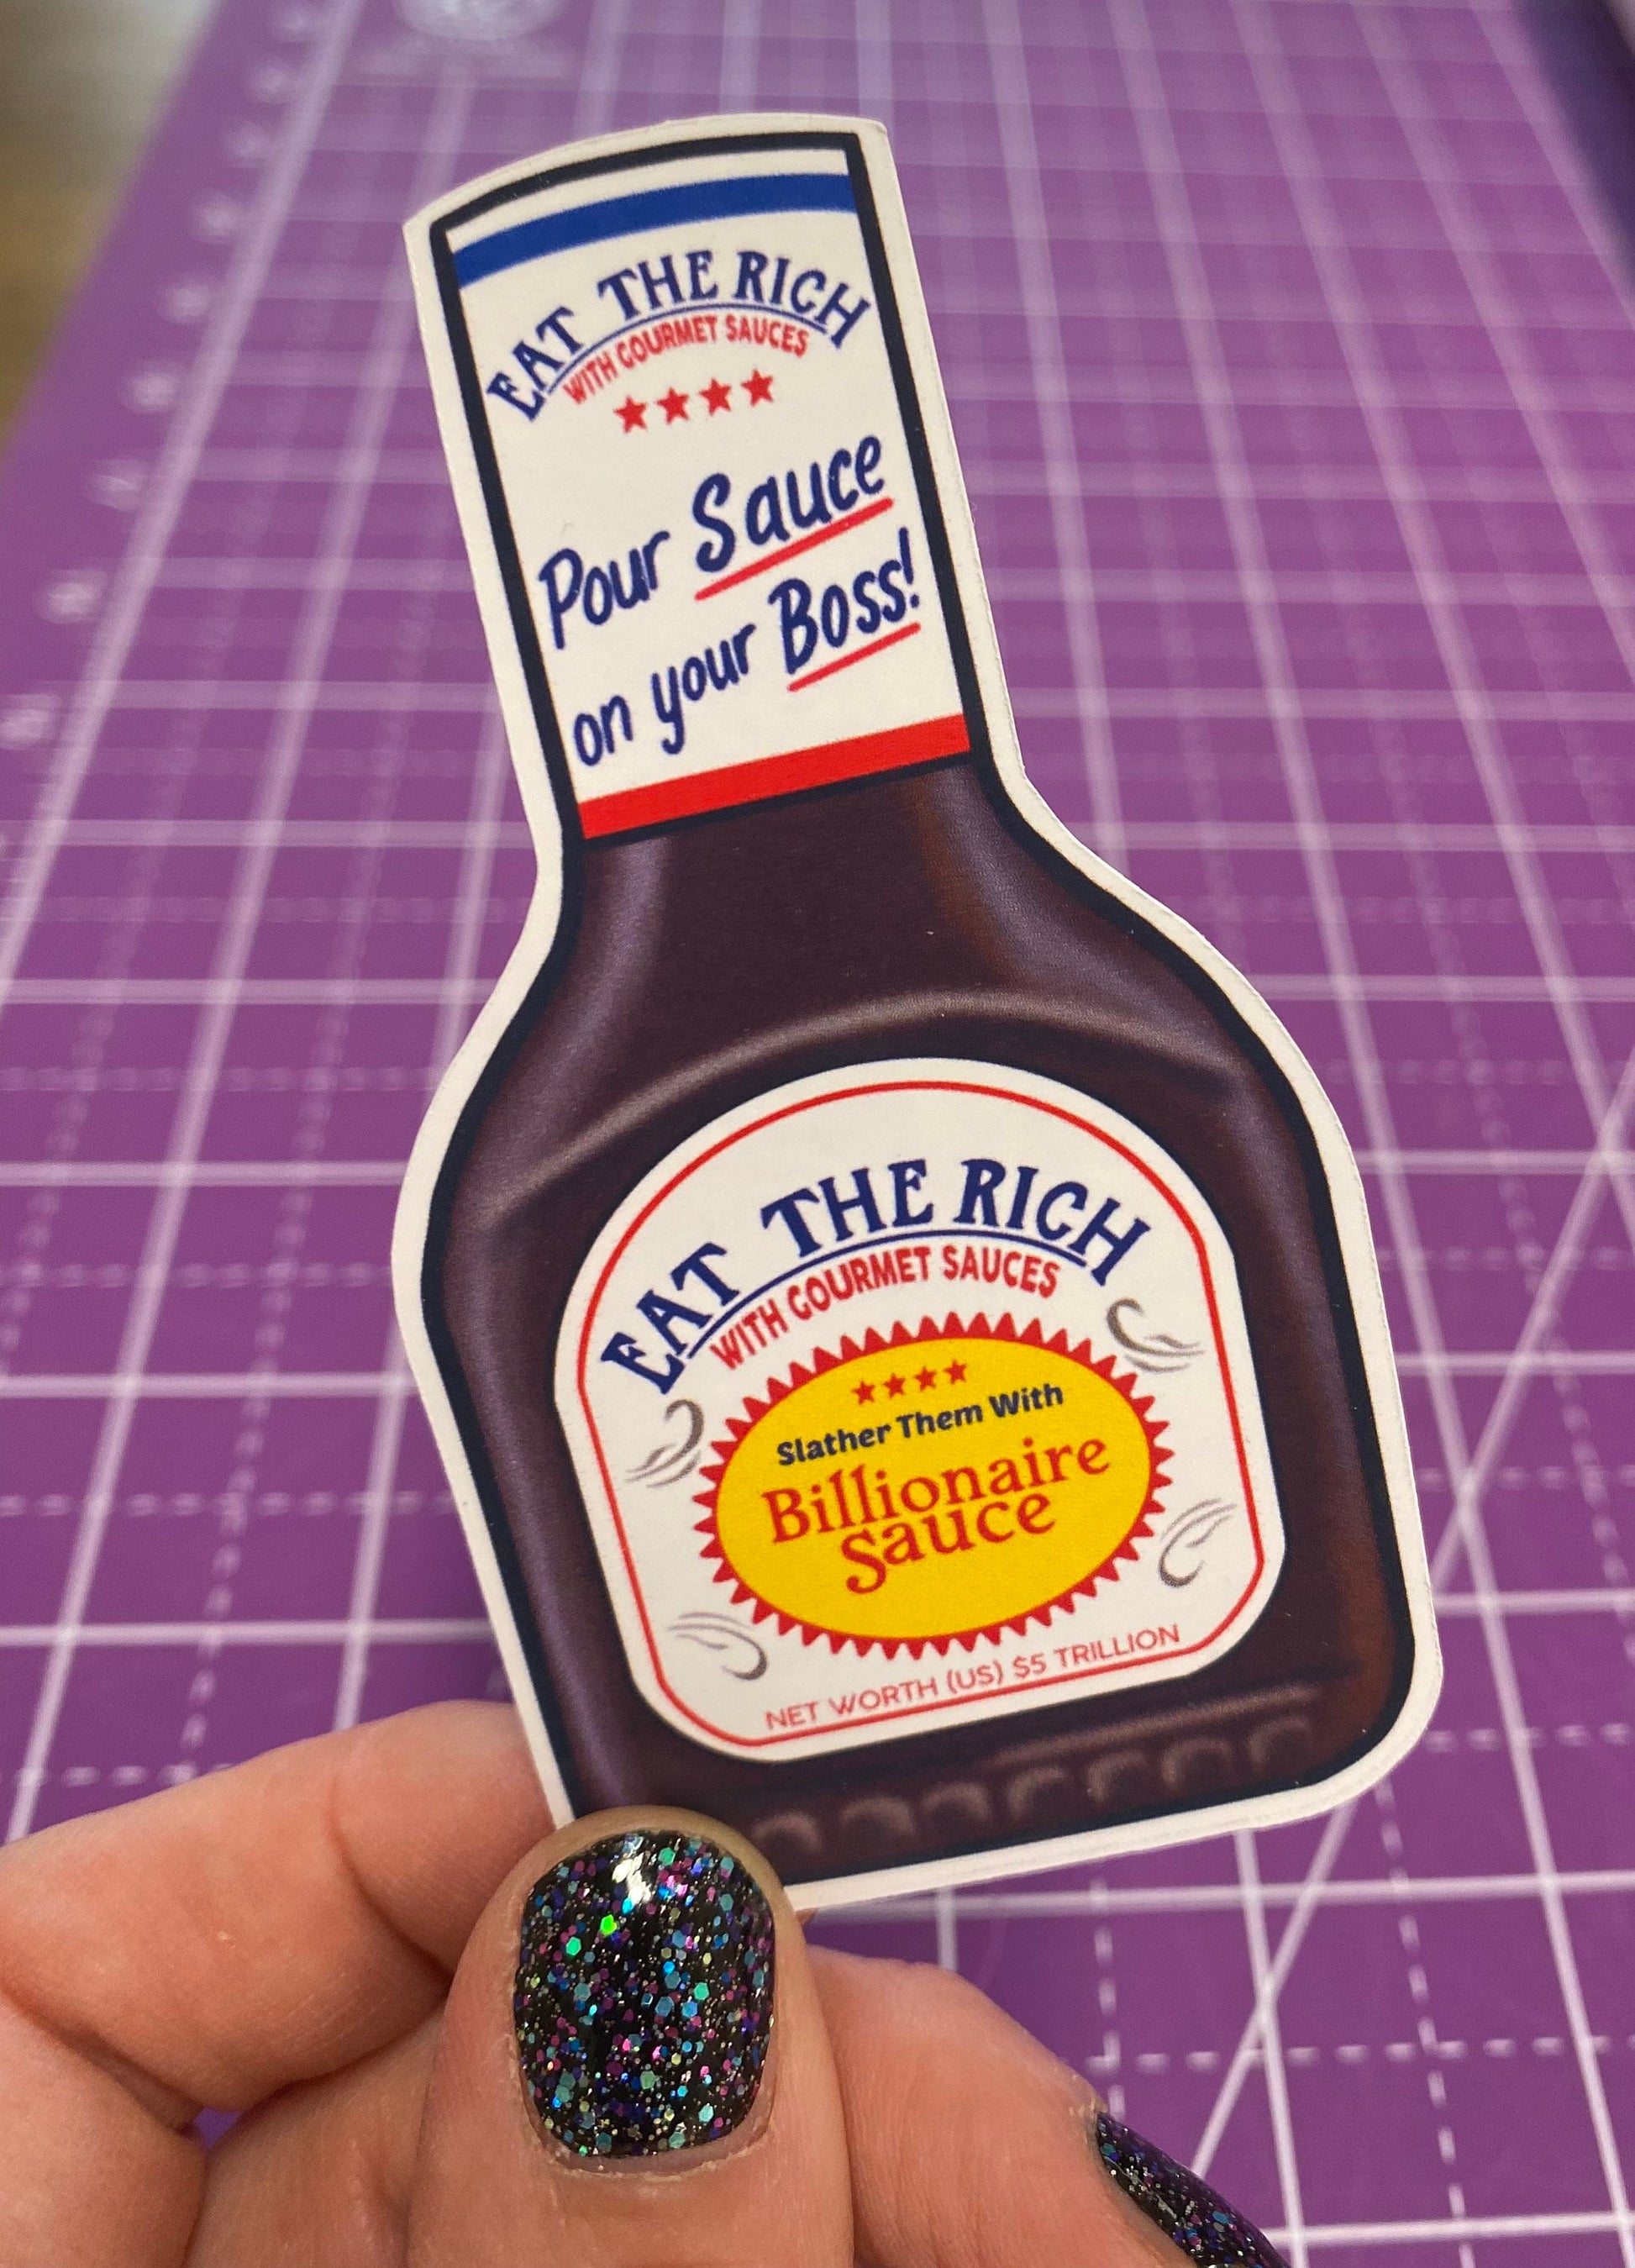 Eat the Rich - Pour Sauce on your Boss Sticker